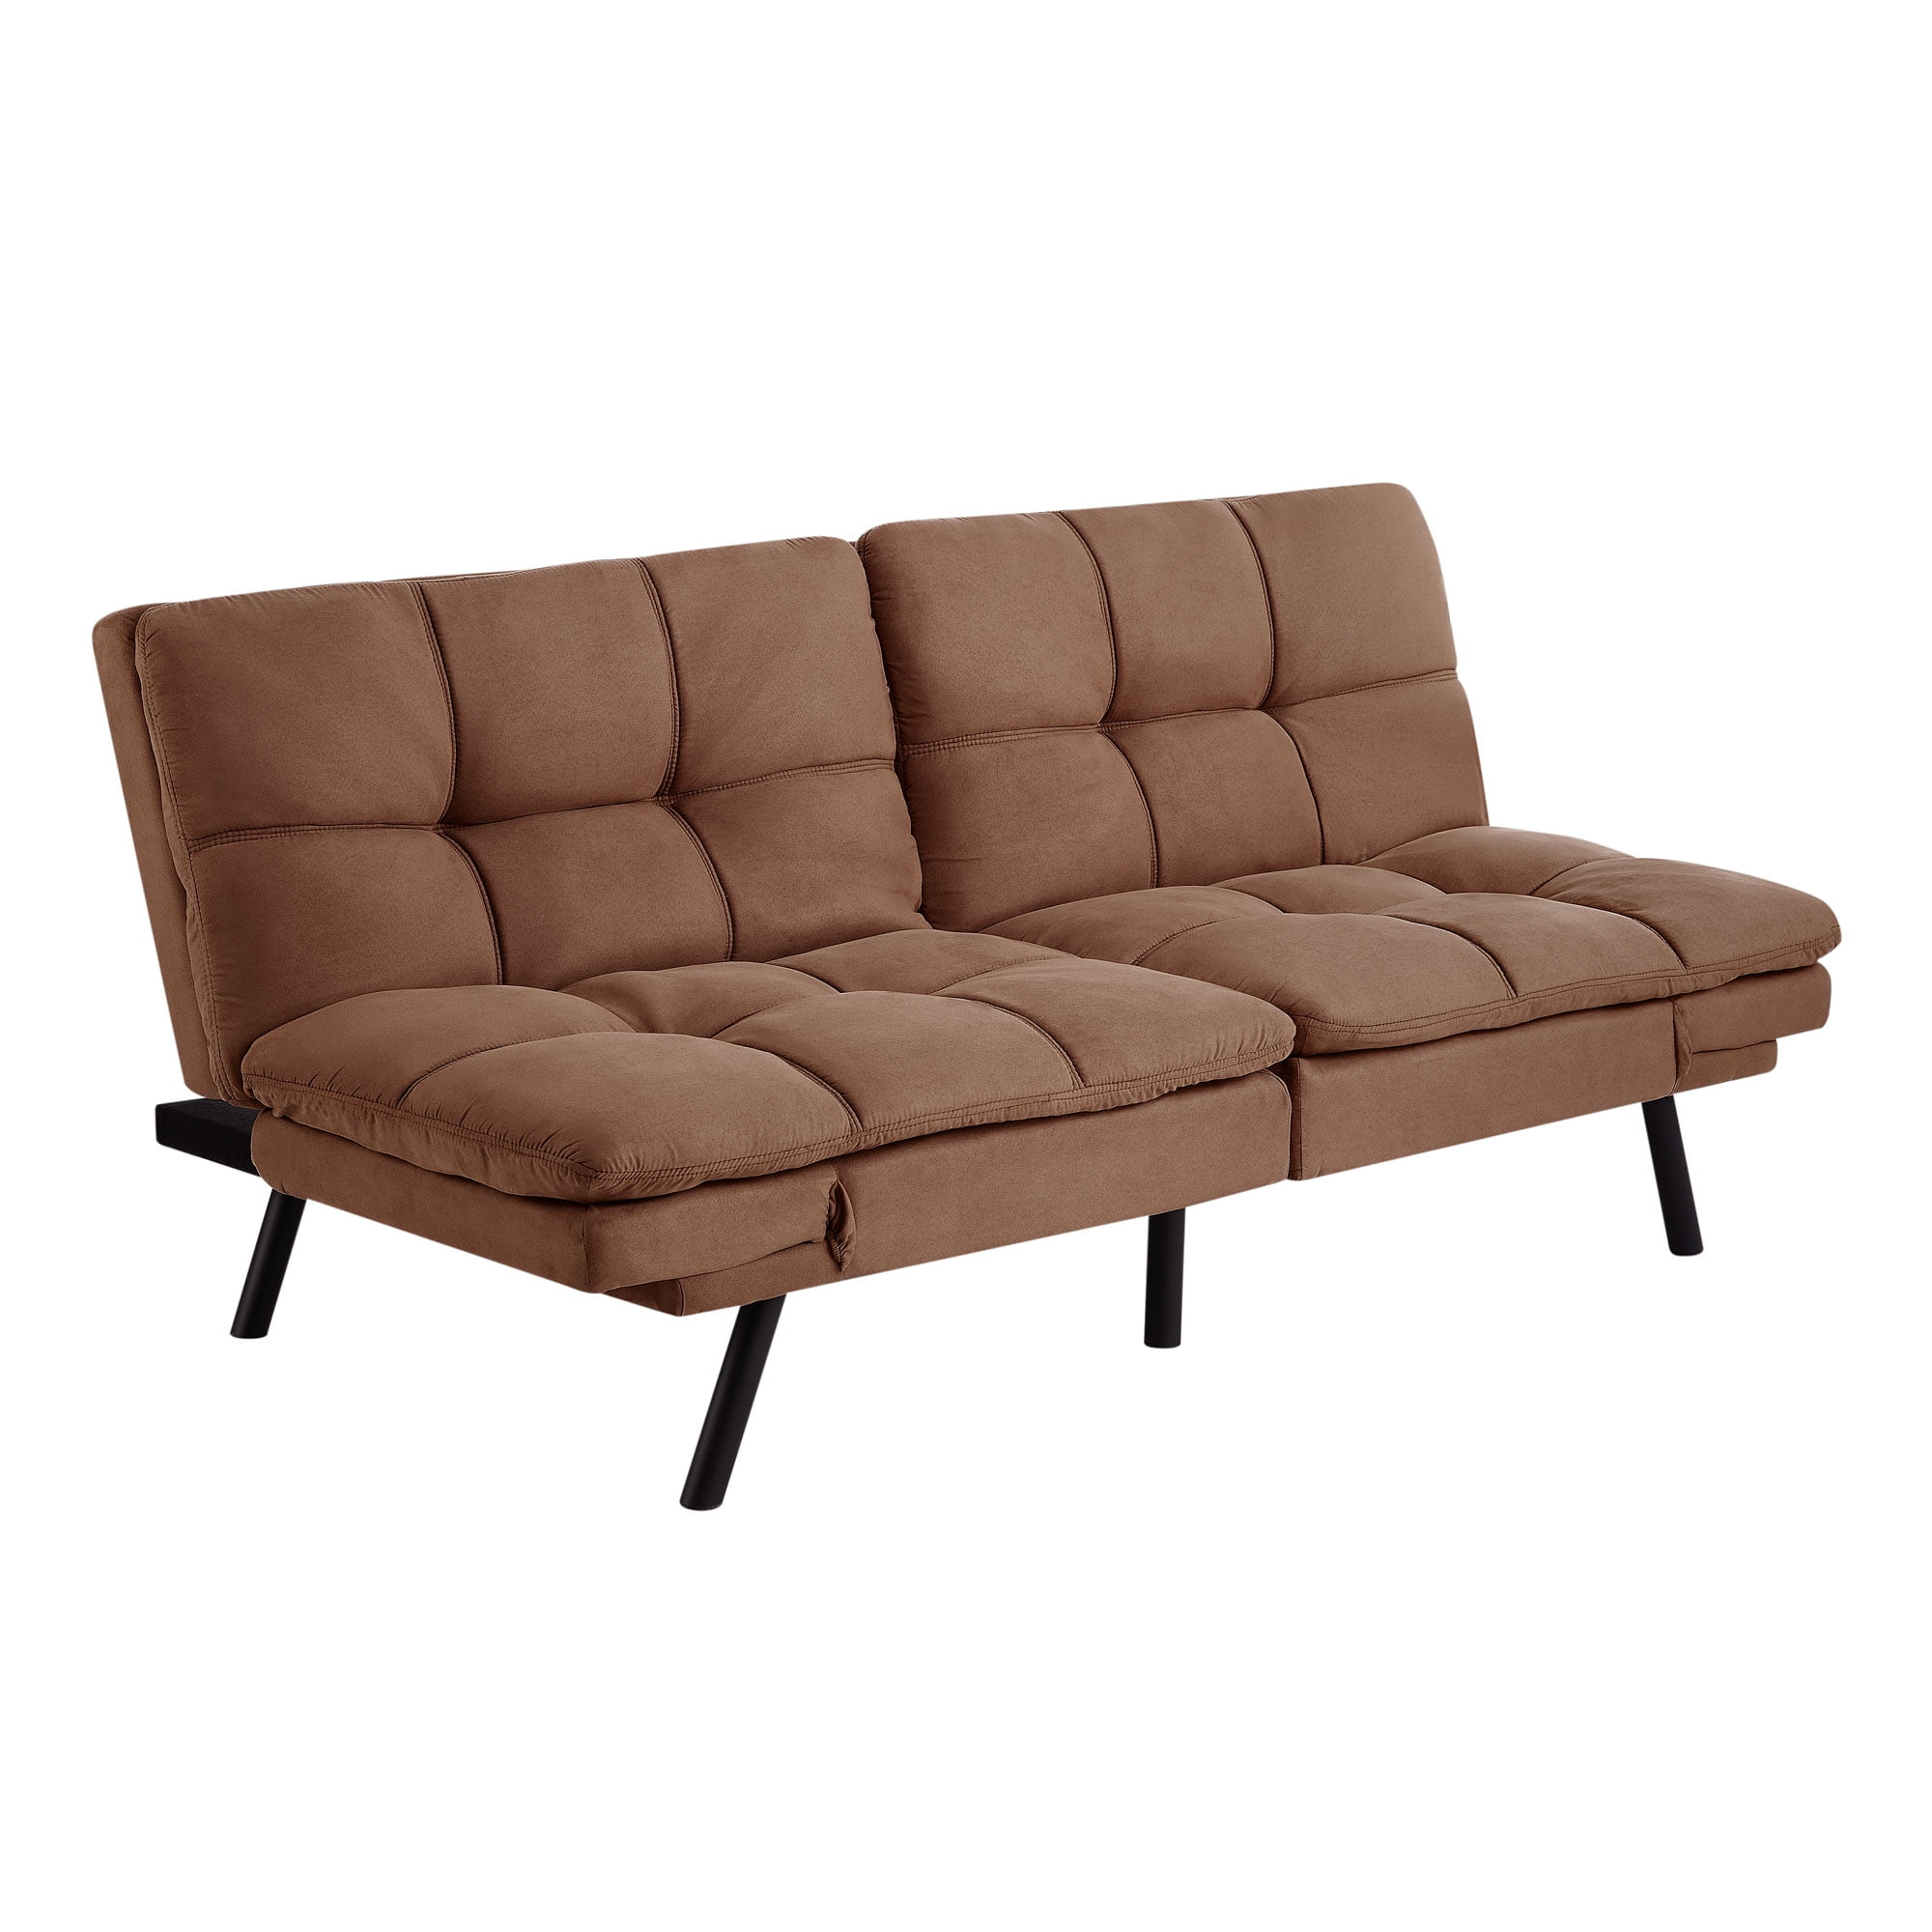 72" Mainstays Memory Foam Futon w/ Adjustable Armrests (Camel Faux Suede) $120 + Free Shipping